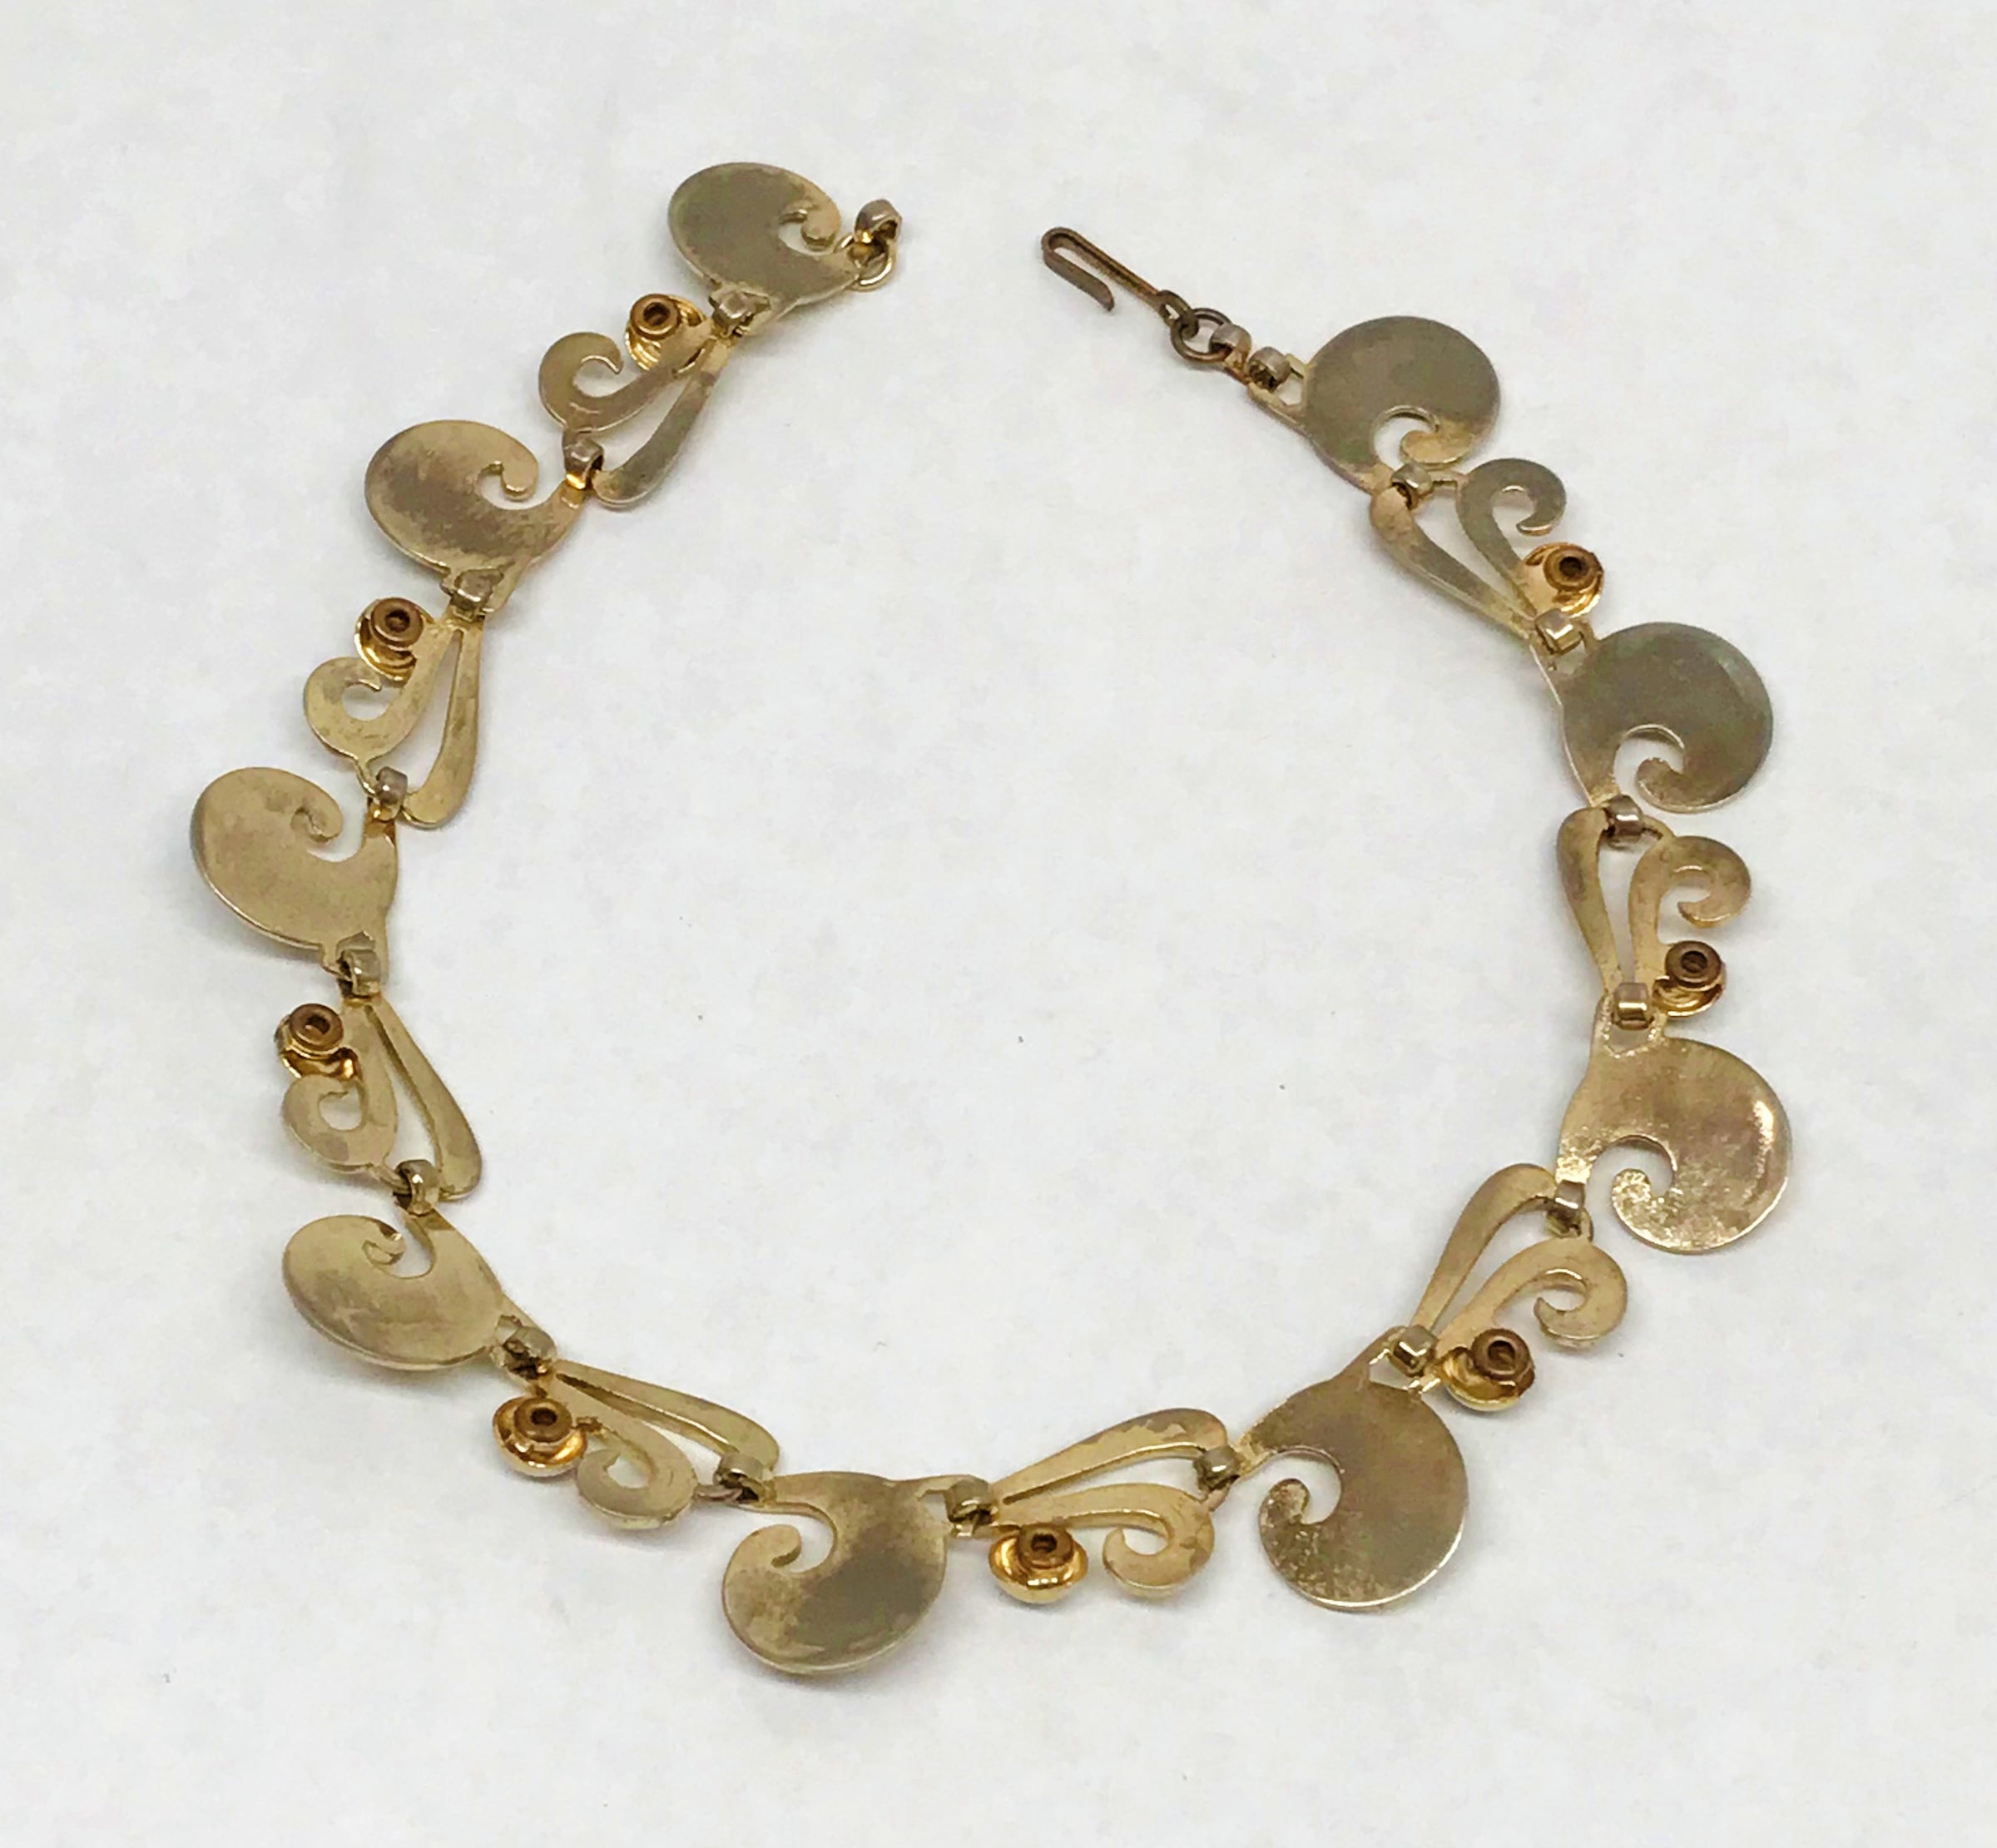 www.hersandhistreasures.com/products/1947-1957-barclay-signed-gold-tone-swirl-choker-link-necklace-13